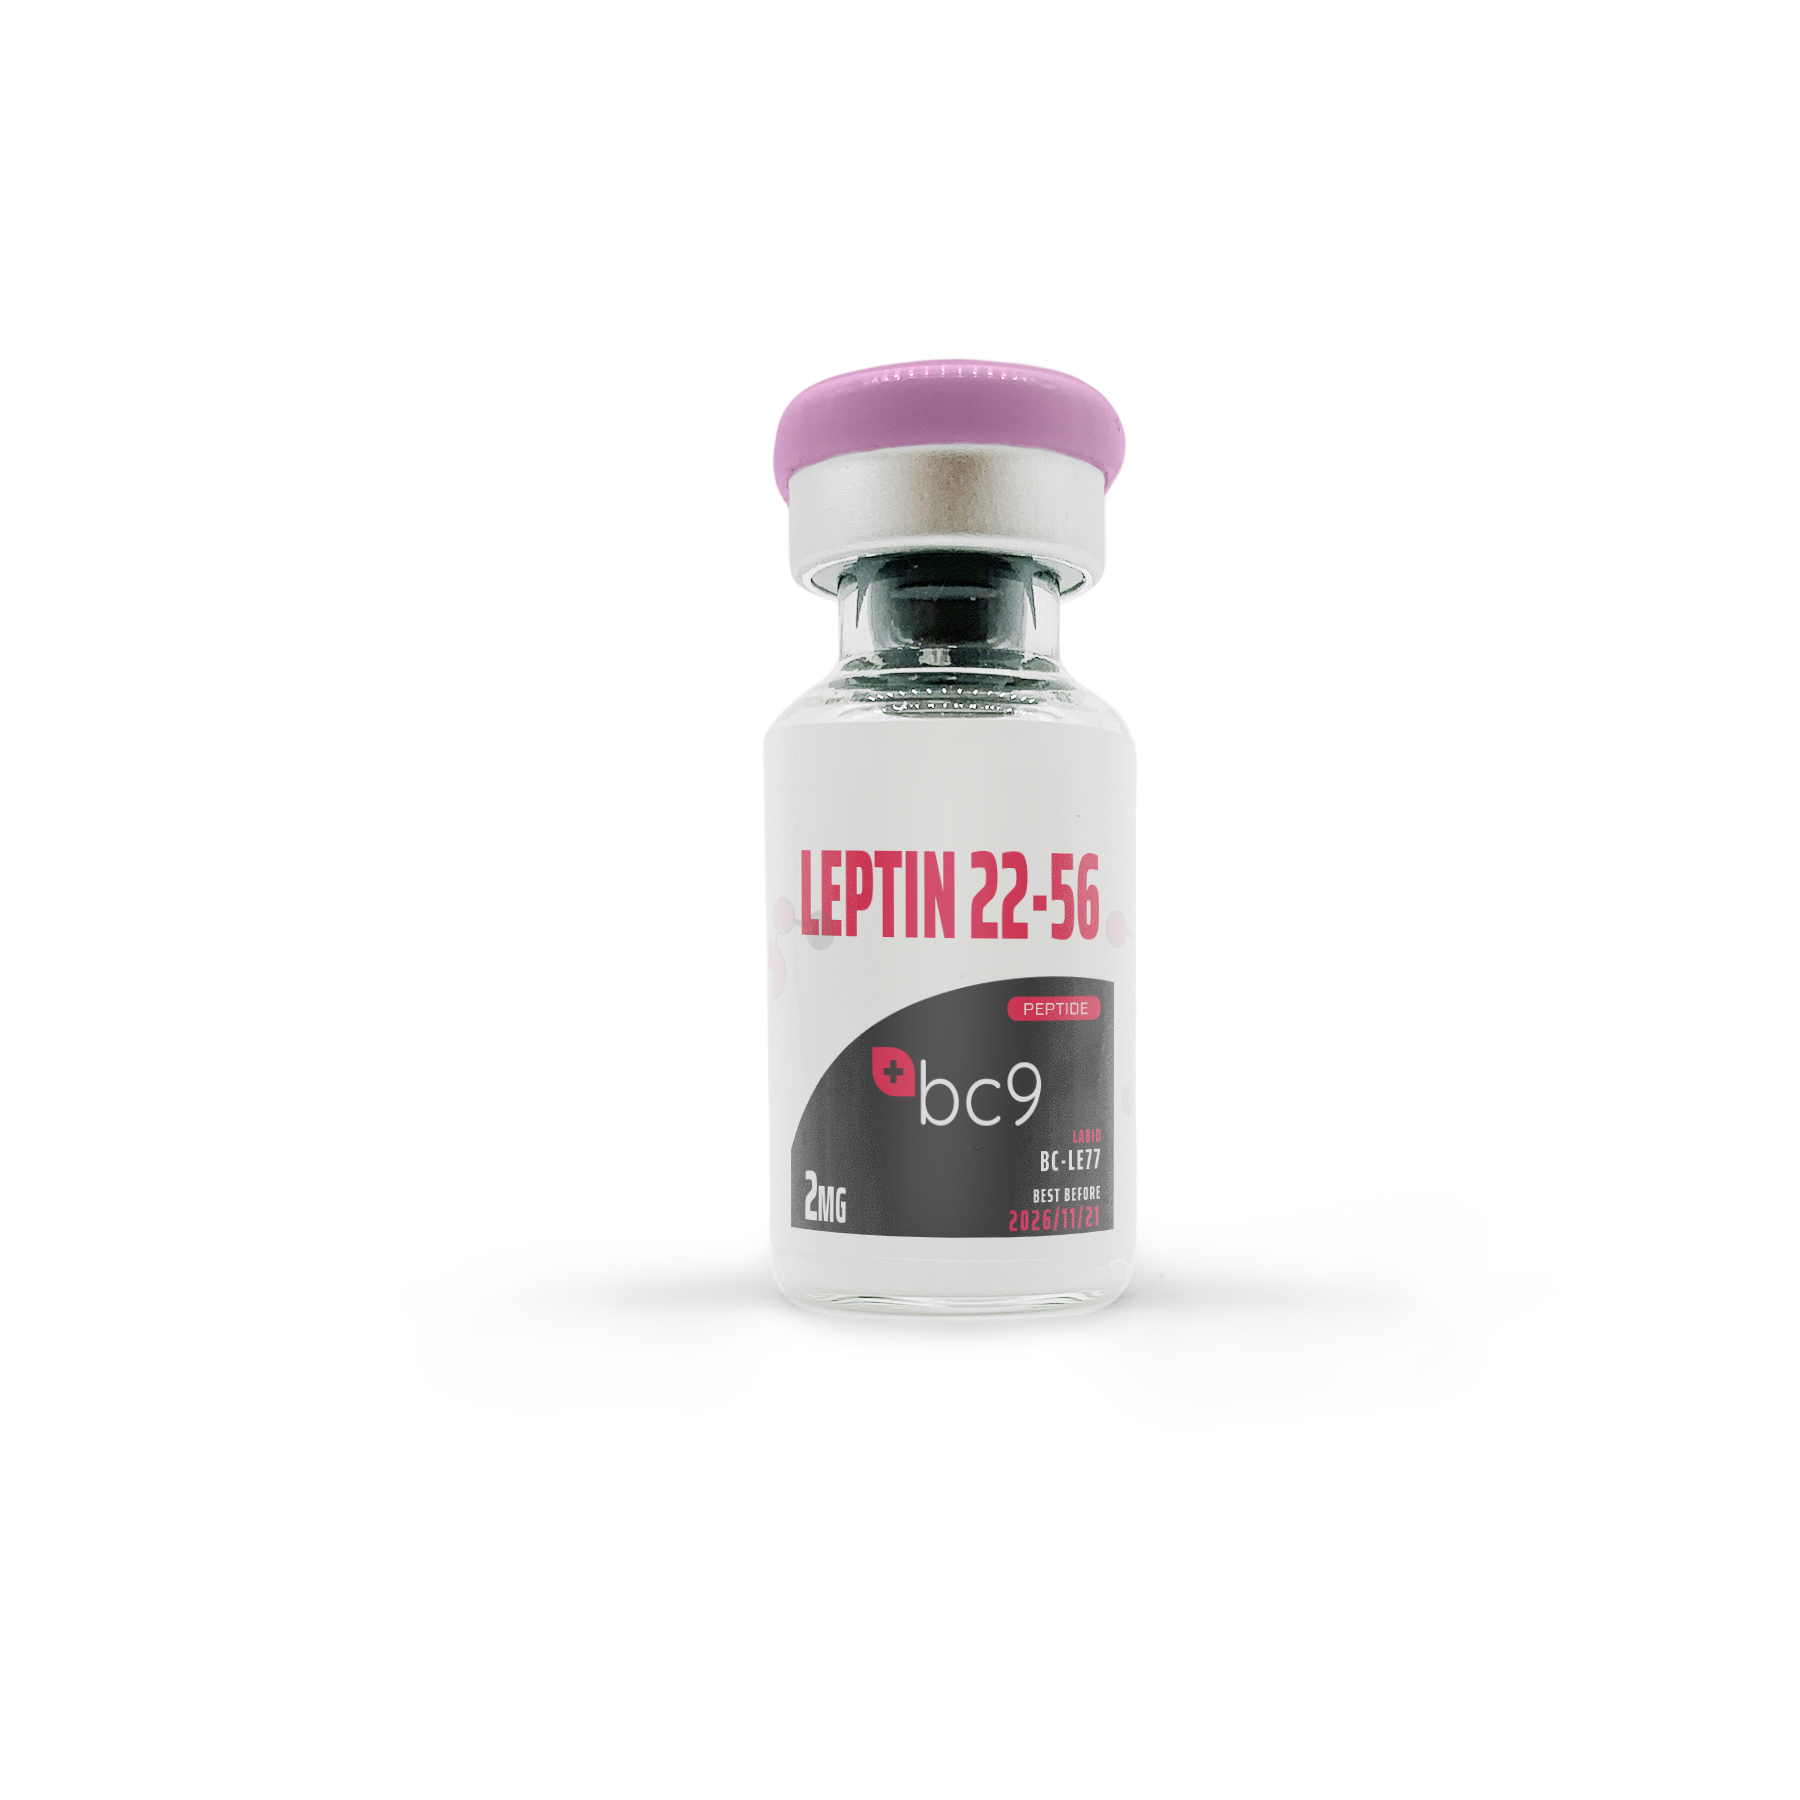 Leptin 22-56 Peptide for Sale | Fast Shipping | BC9.org